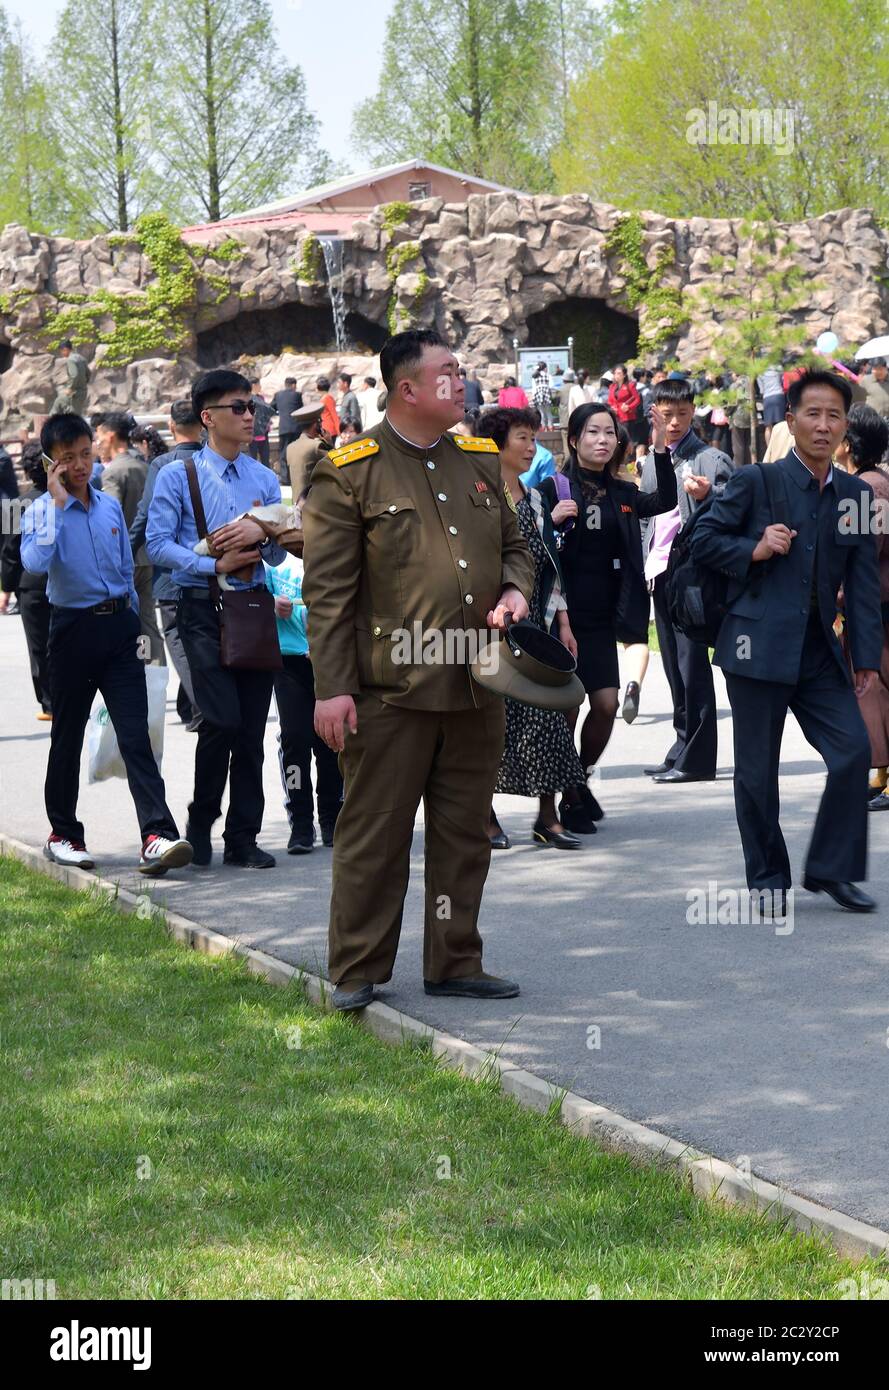 Pyongyang, North Korea - May 1, 2019: People gather to celebrate May 1st Labor Day on the Pyongyang street. In the foreground is an officer of the Kor Stock Photo